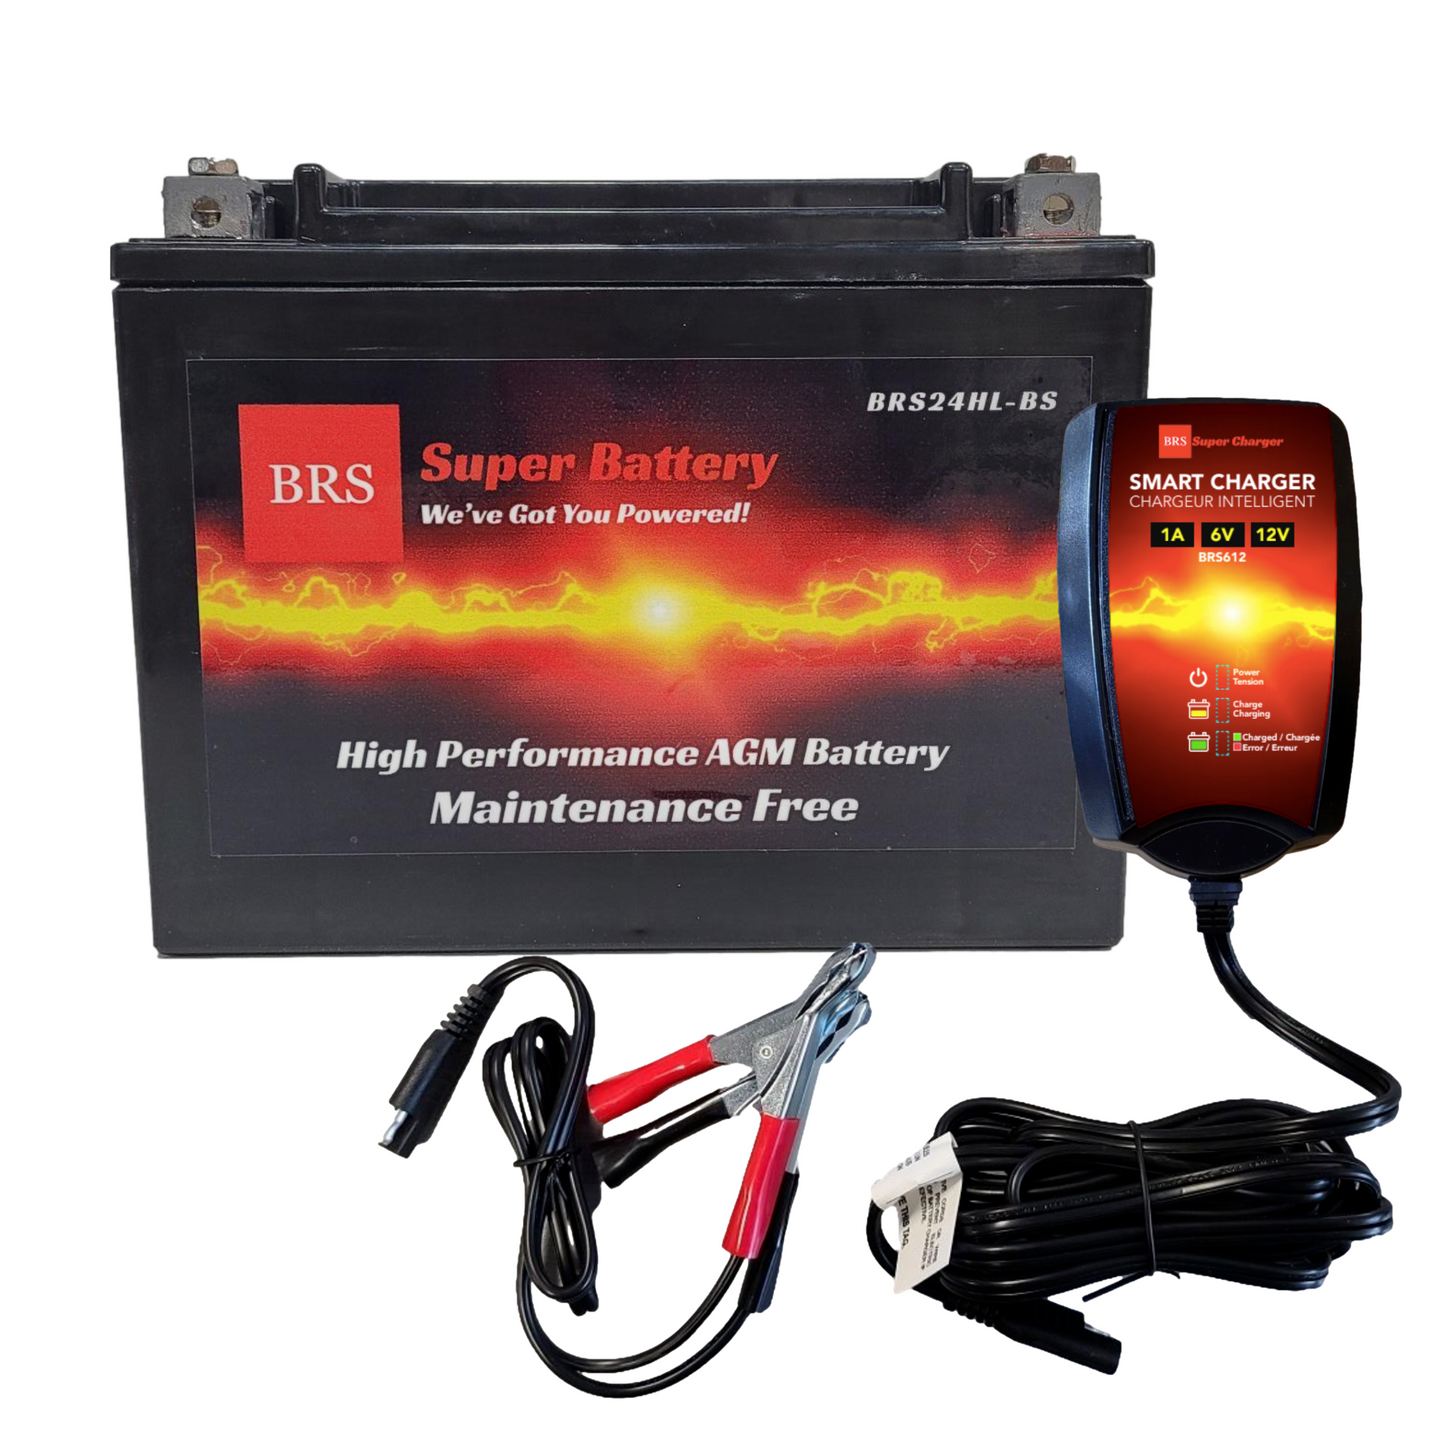 High Performance BRS24HL-BS 10 Year Battery & Smart Charger / Maintainer Combo Bundle Kit 12v Sealed AGM PowerSports Battery - BRS Super Battery